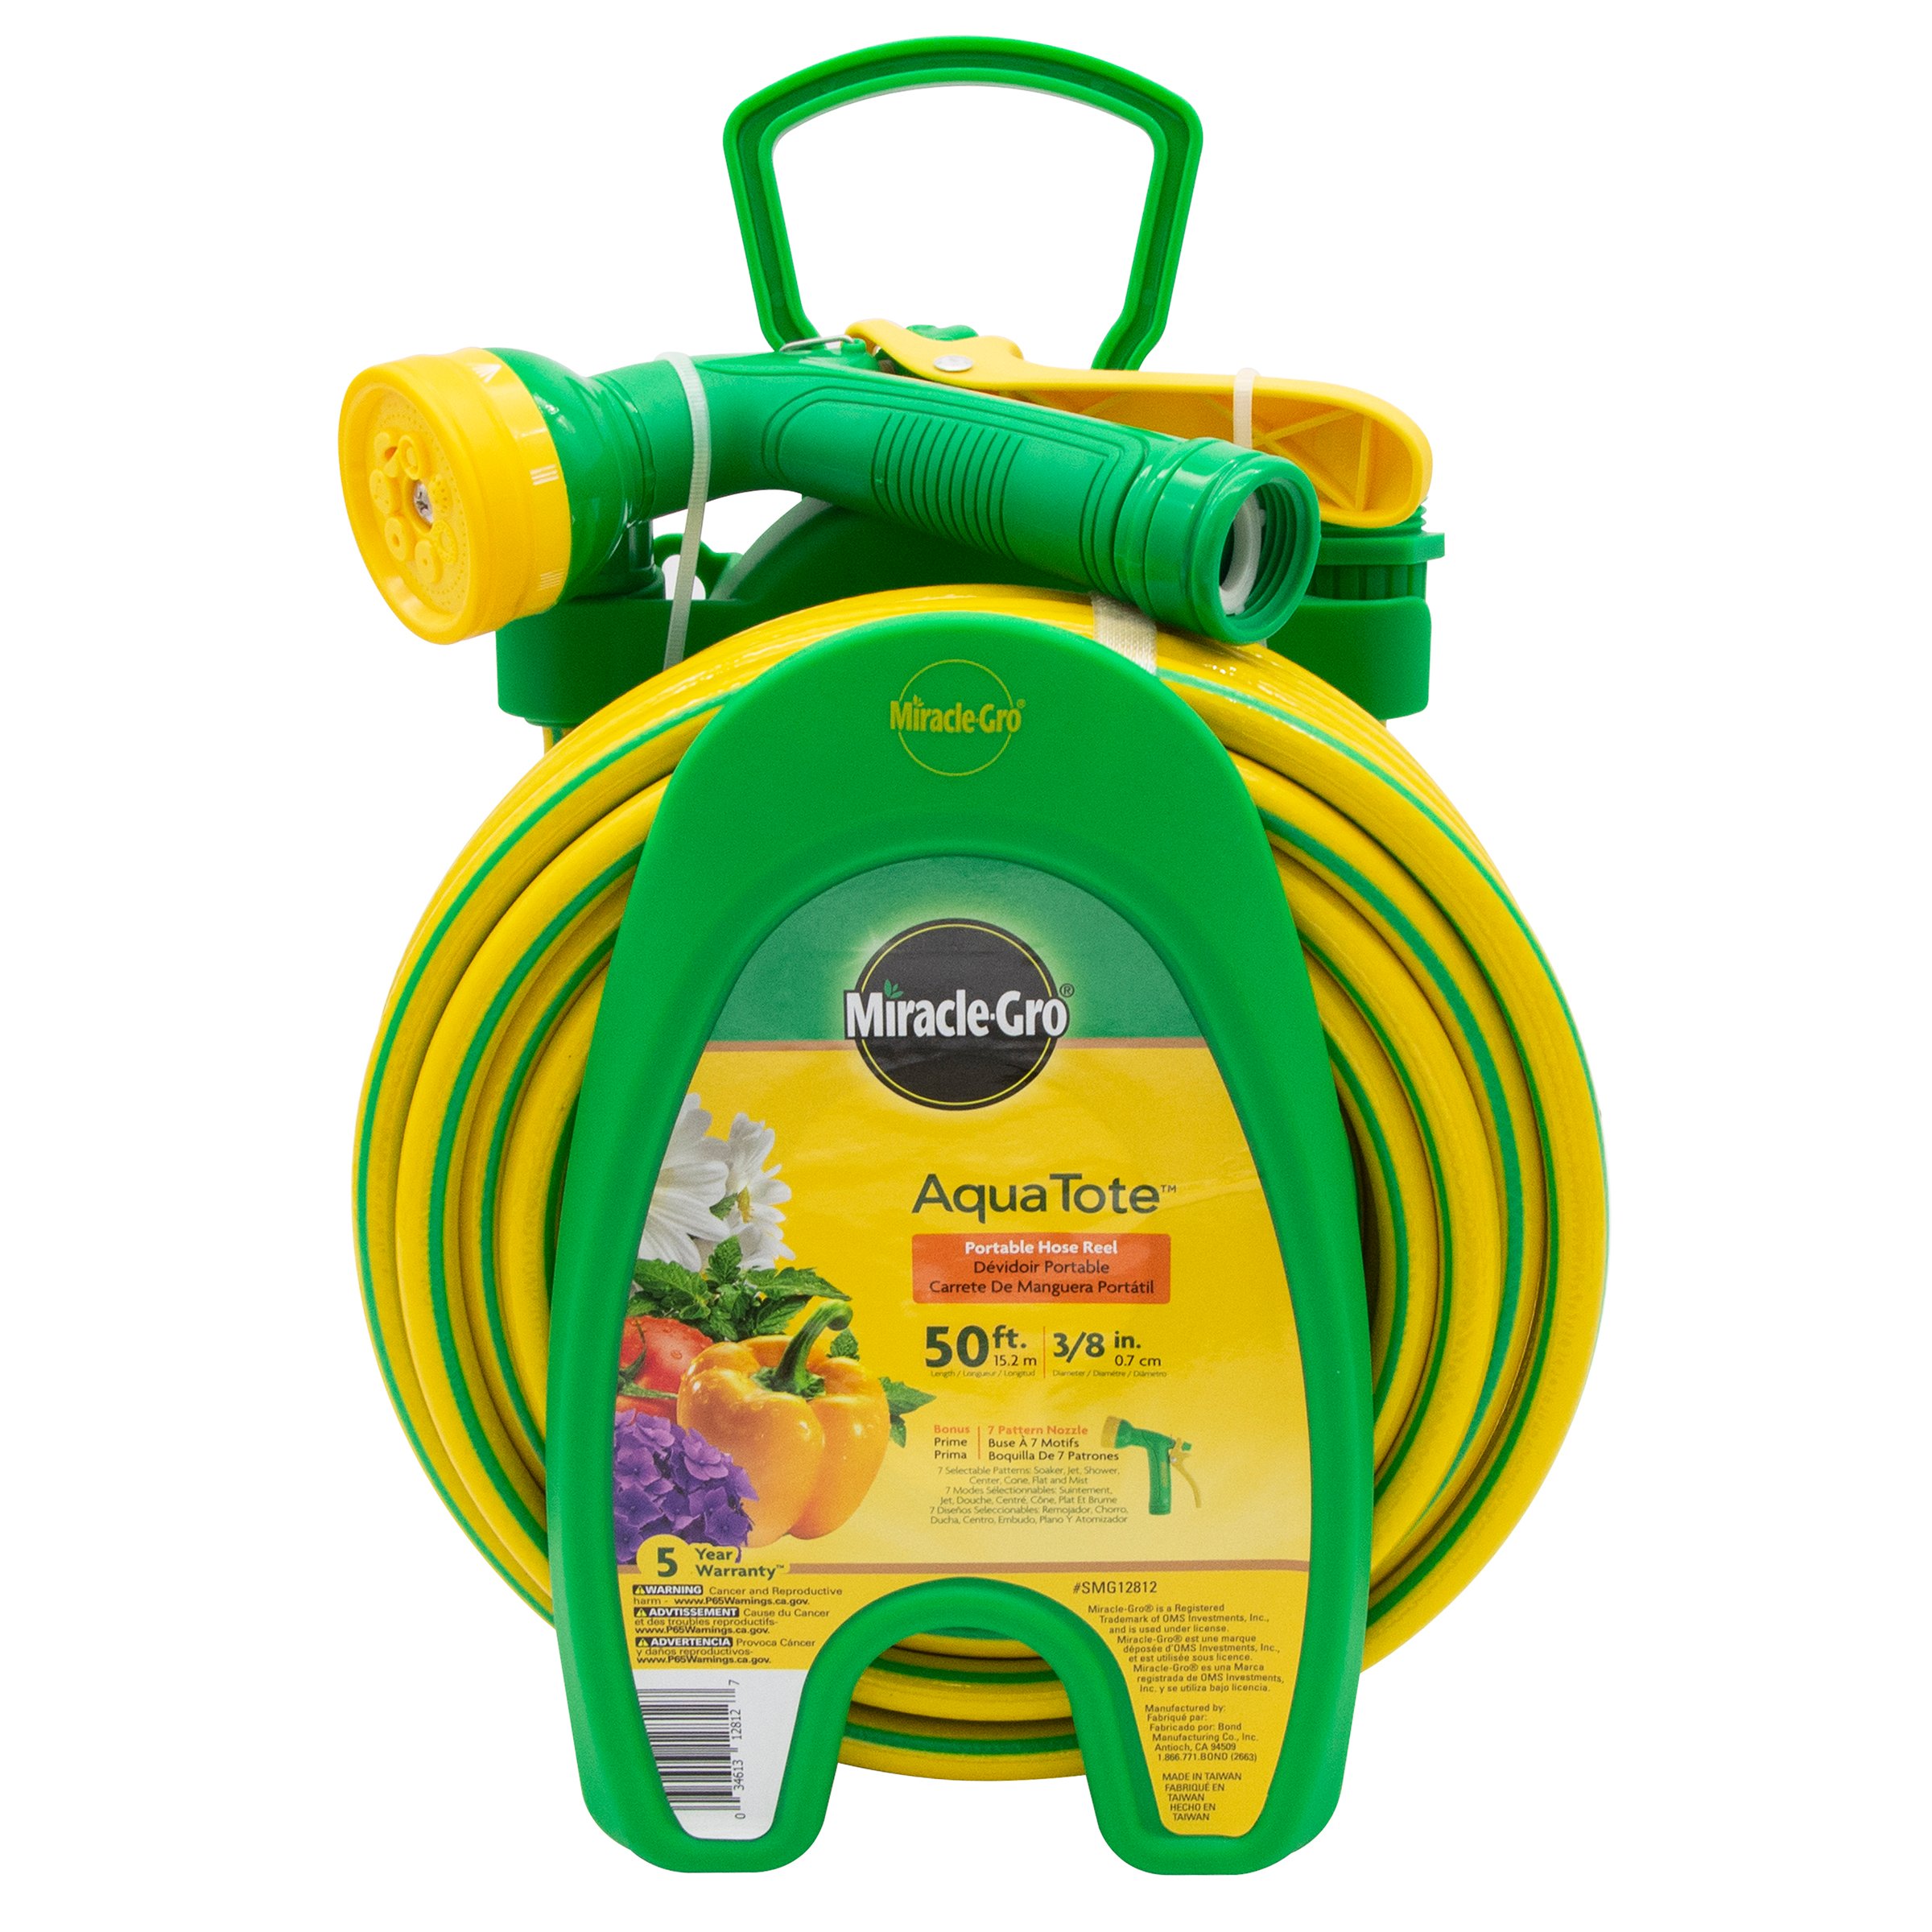 Miracle-Gro Aqua Tote Portable Hose Reel with Nozzle